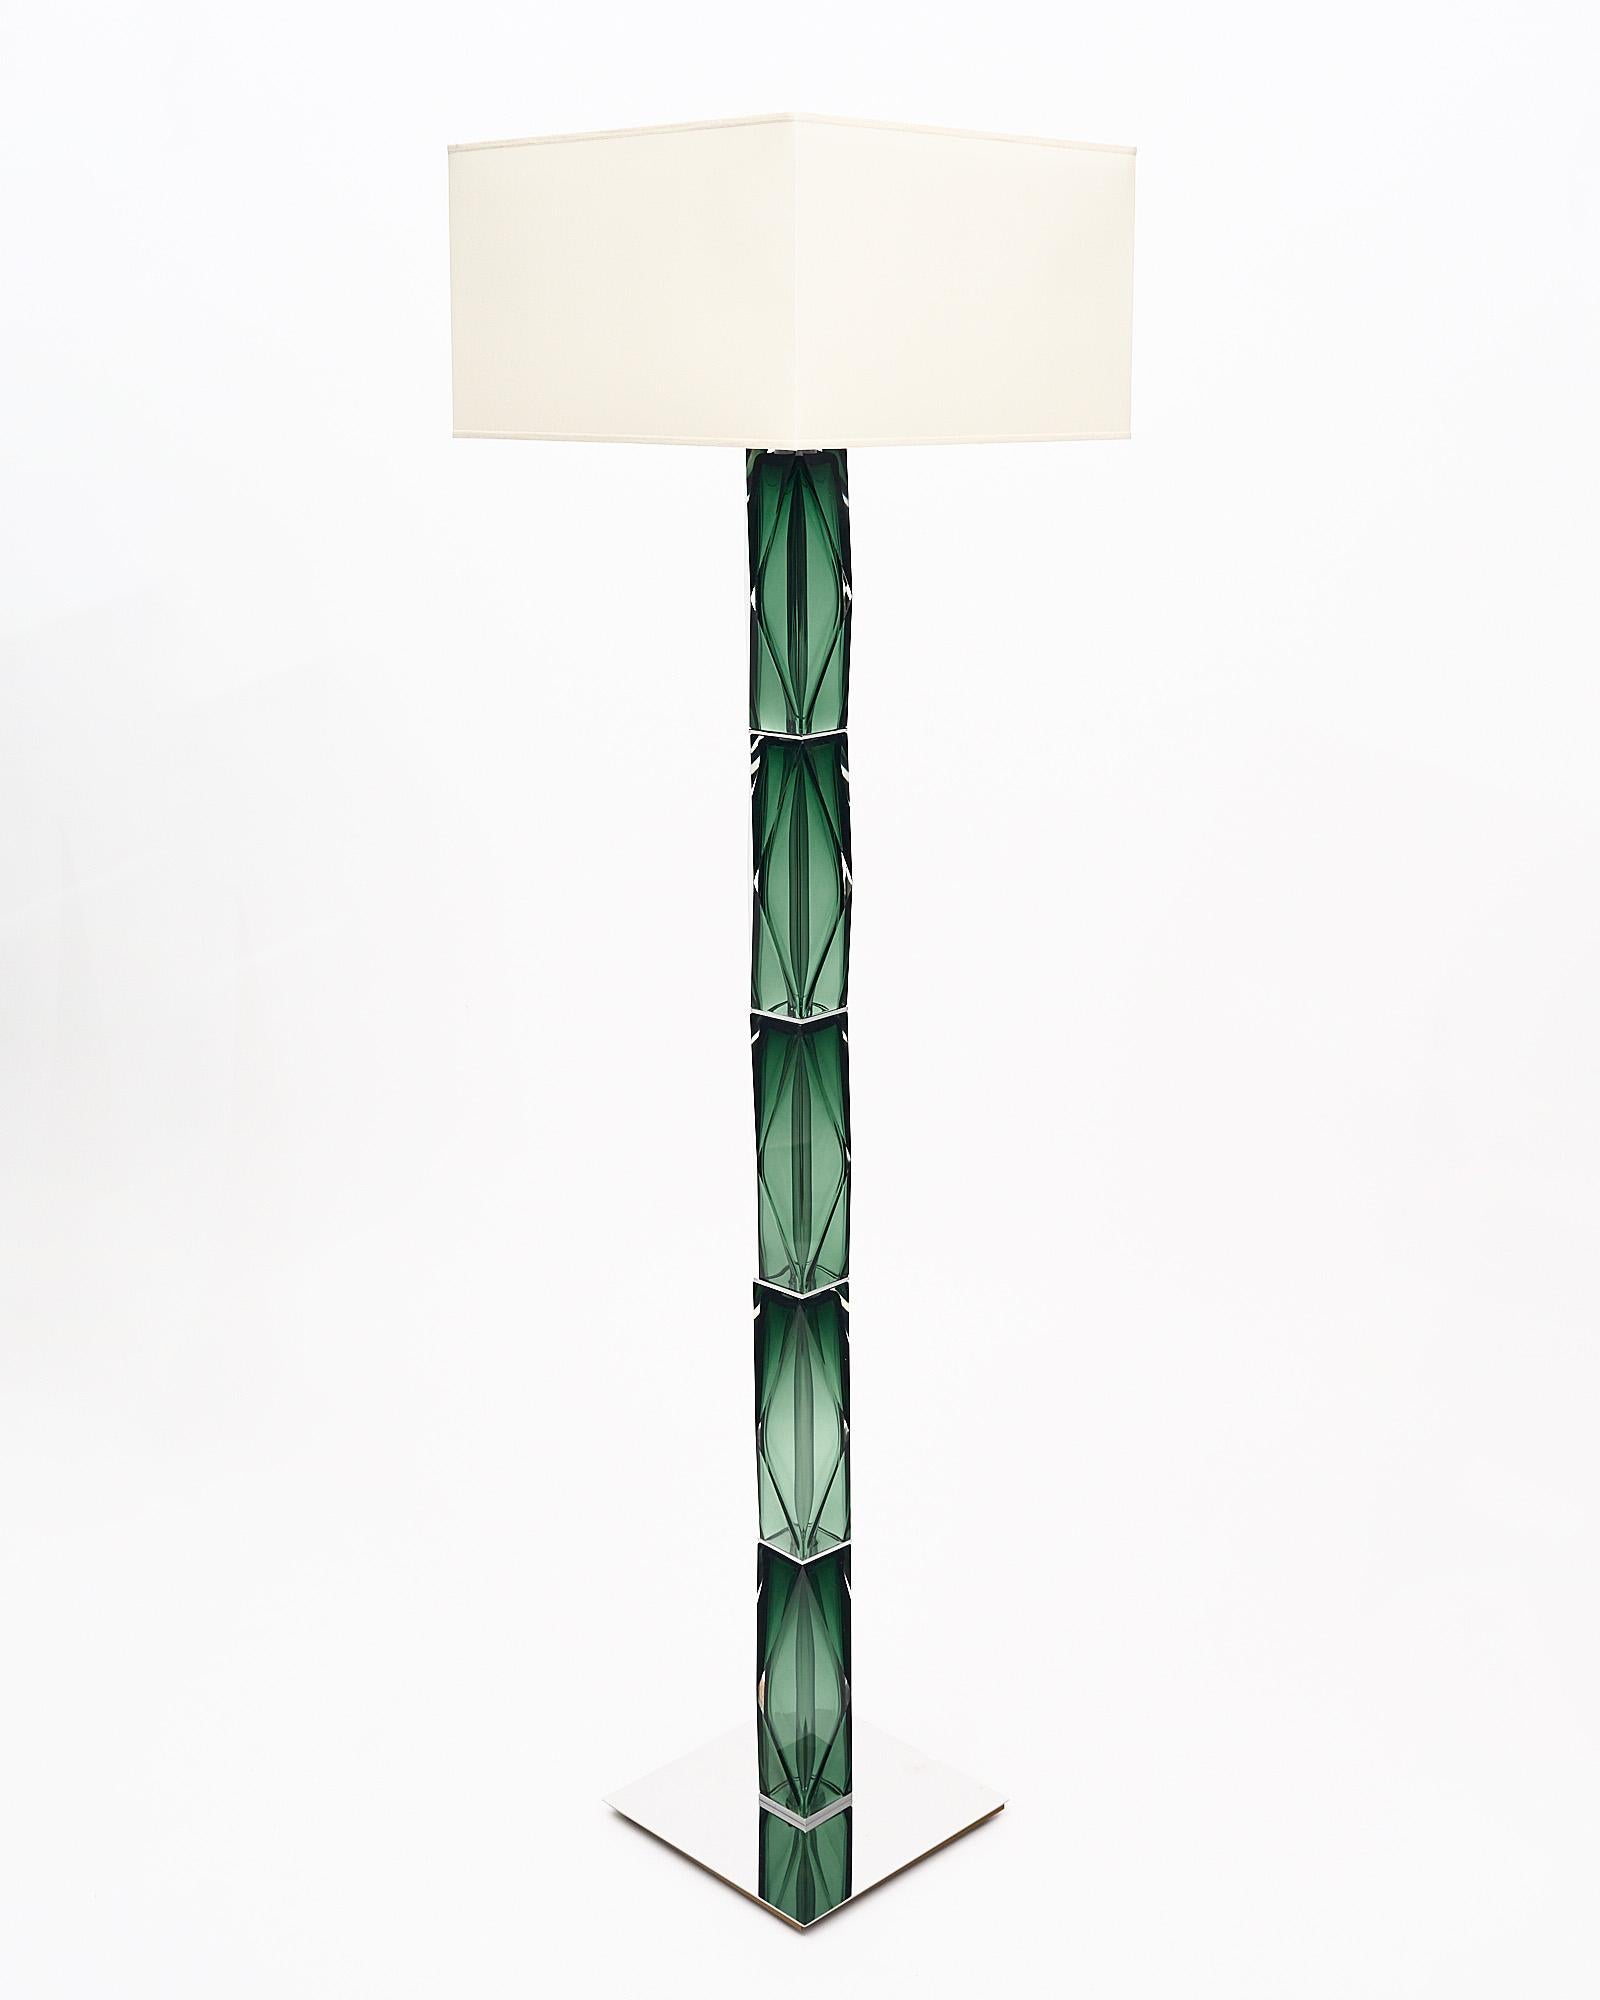 Pair of floor lamps made with green Murano glass elements on a chrome structure. Each hand-blown glass element has a jewel like shape with faceted angles. We love the way the light plays off the geometric glass of this pair. Each lamp has two bulbs;